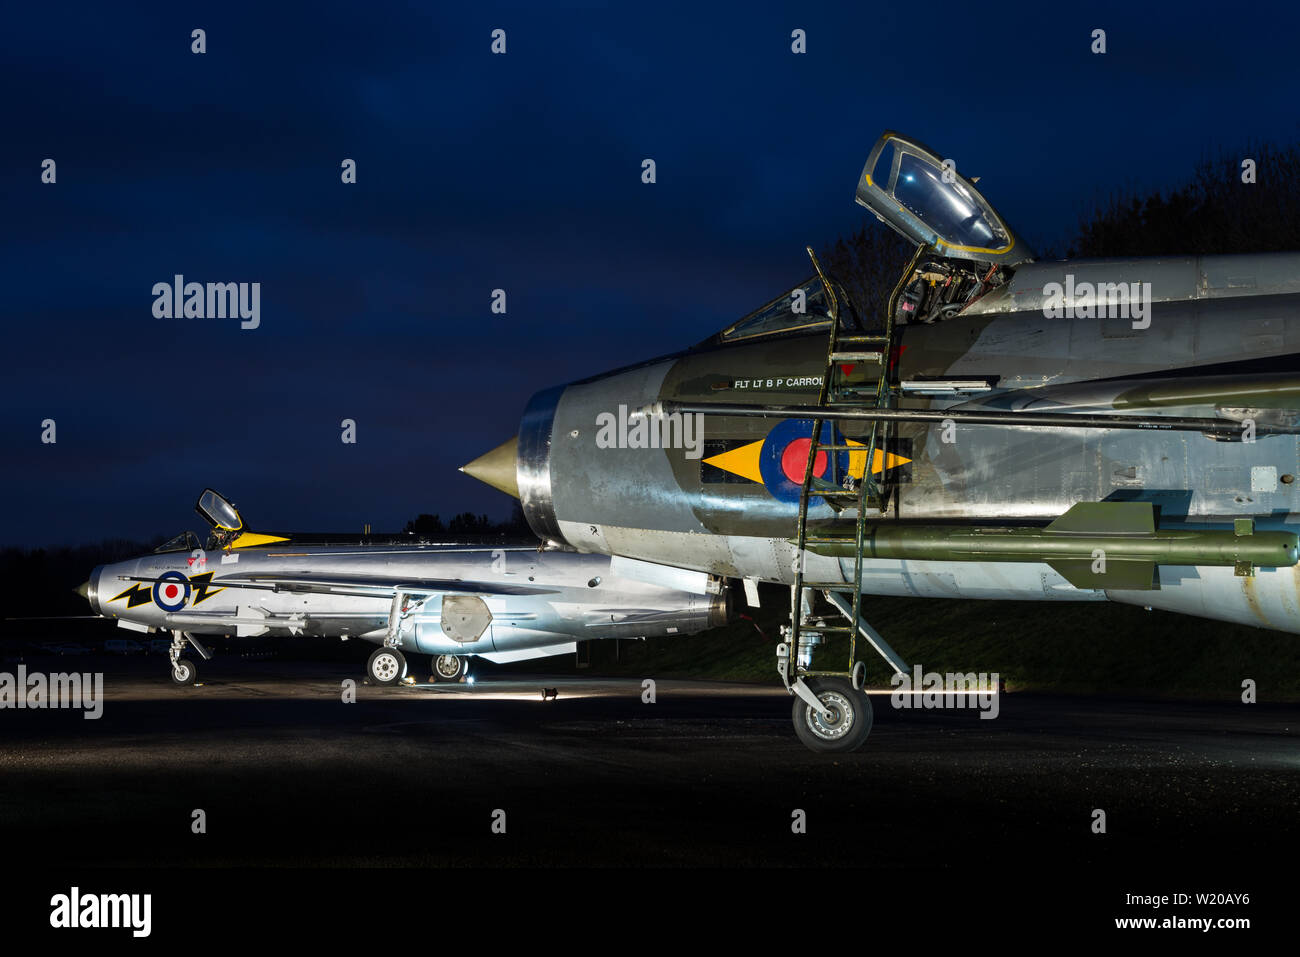 An English Electric Lightning Cold War fighter jet of the Royal Air Force at the Bruntingthorpe Aerodrome and Proving Ground. Stock Photo